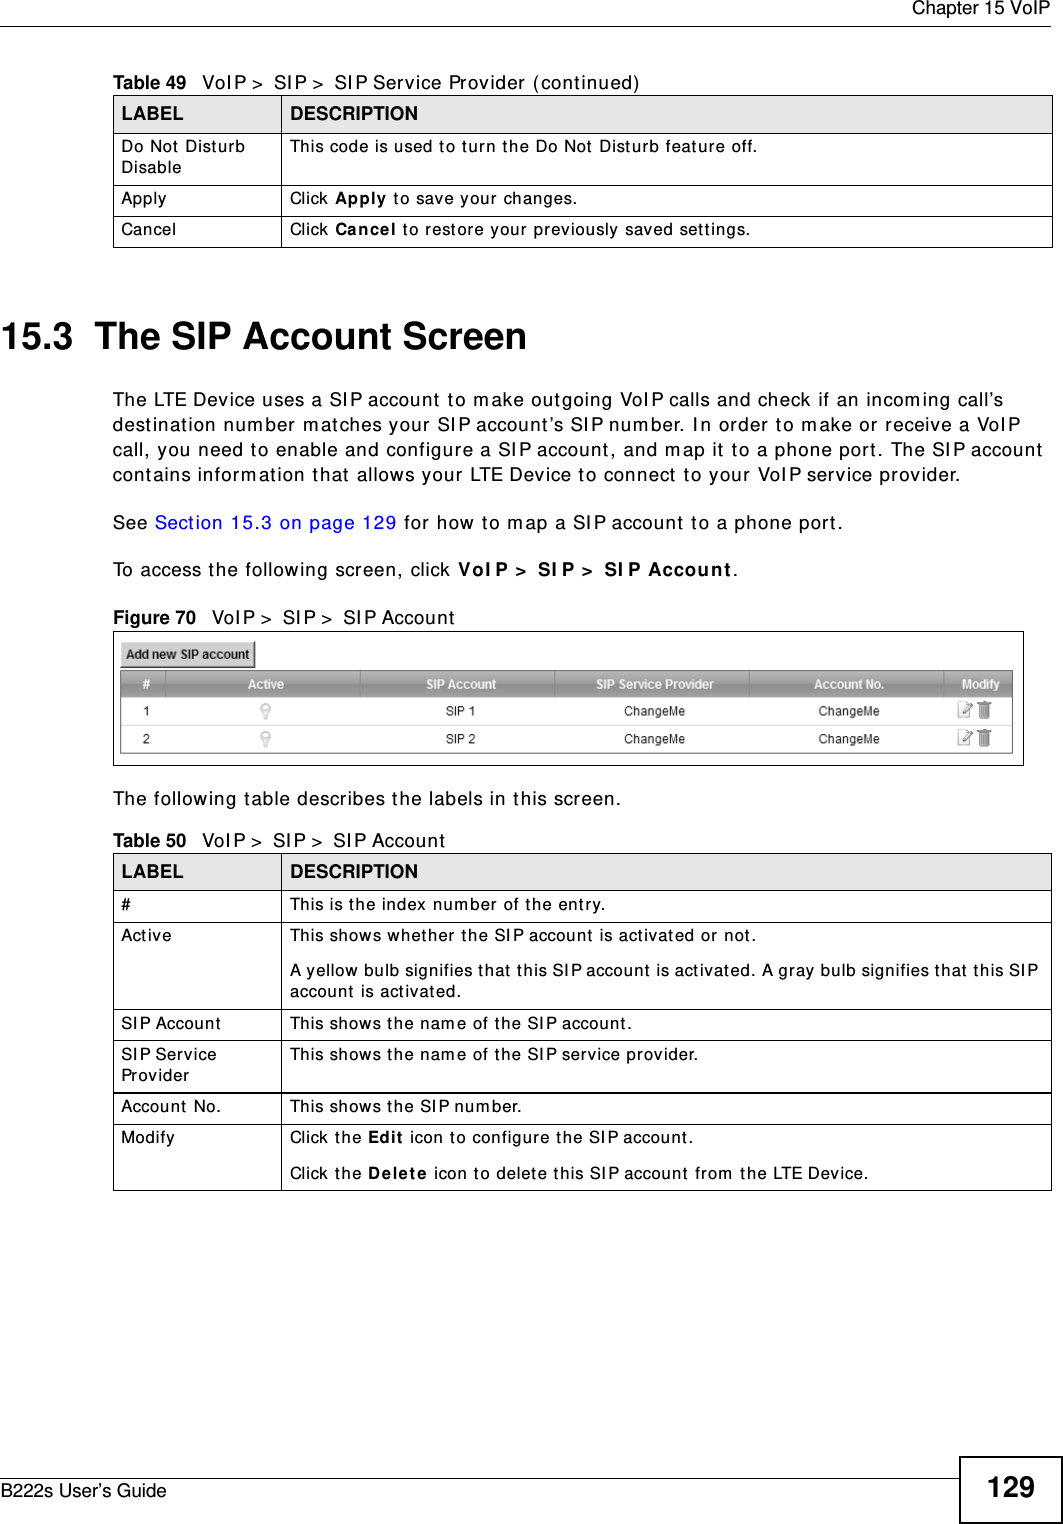  Chapter 15 VoIPB222s User’s Guide 12915.3  The SIP Account ScreenThe LTE Device uses a SI P account  t o m ake out going VoI P calls and check if an incom ing call’s destinat ion num ber m atches your SI P account ’s SI P num ber. I n order t o m ake or receive a VoI P call, you need t o enable and configure a SI P account, and m ap it t o a phone port . The SI P account  contains inform ation t hat  allows your LTE Device t o connect t o your VoI P service provider. See Sect ion 15.3 on page 129 for how t o m ap a SI P account  t o a phone port .To access t he following screen, click VoI P &gt;  SI P &gt;  SI P Account .Figure 70   VoI P &gt;  SI P &gt;  SI P AccountThe following t able describes t he labels in t his screen.Do Not Disturb DisableThis code is used t o t urn t he Do Not  Dist urb feature off.Apply Click Apply t o save your changes.Cancel Click Can cel t o rest ore your previously saved set t ings.Table 49   VoI P &gt;  SI P &gt;  SI P Service Prov ider ( cont inued)LABEL DESCRIPTIONTable 50   VoI P &gt;  SI P &gt;  SI P AccountLABEL DESCRIPTION# This is t he index num ber of t he ent ry.Active This show s whether t he SI P account  is act ivated or not.A yellow bulb signifies t hat  t his SI P account  is activat ed. A gray bulb signifies t hat  t his SI P account  is act ivated.SI P Account  This shows t he nam e of the SI P account.SI P Service ProviderThis show s t he nam e of t he SI P service pr ovider.Account  No. This shows t he SI P num ber.Modify Click t he Ed it  icon t o configure t he SI P account.Click t he D e le t e icon to delet e t his SI P account from  t he LTE Device. 